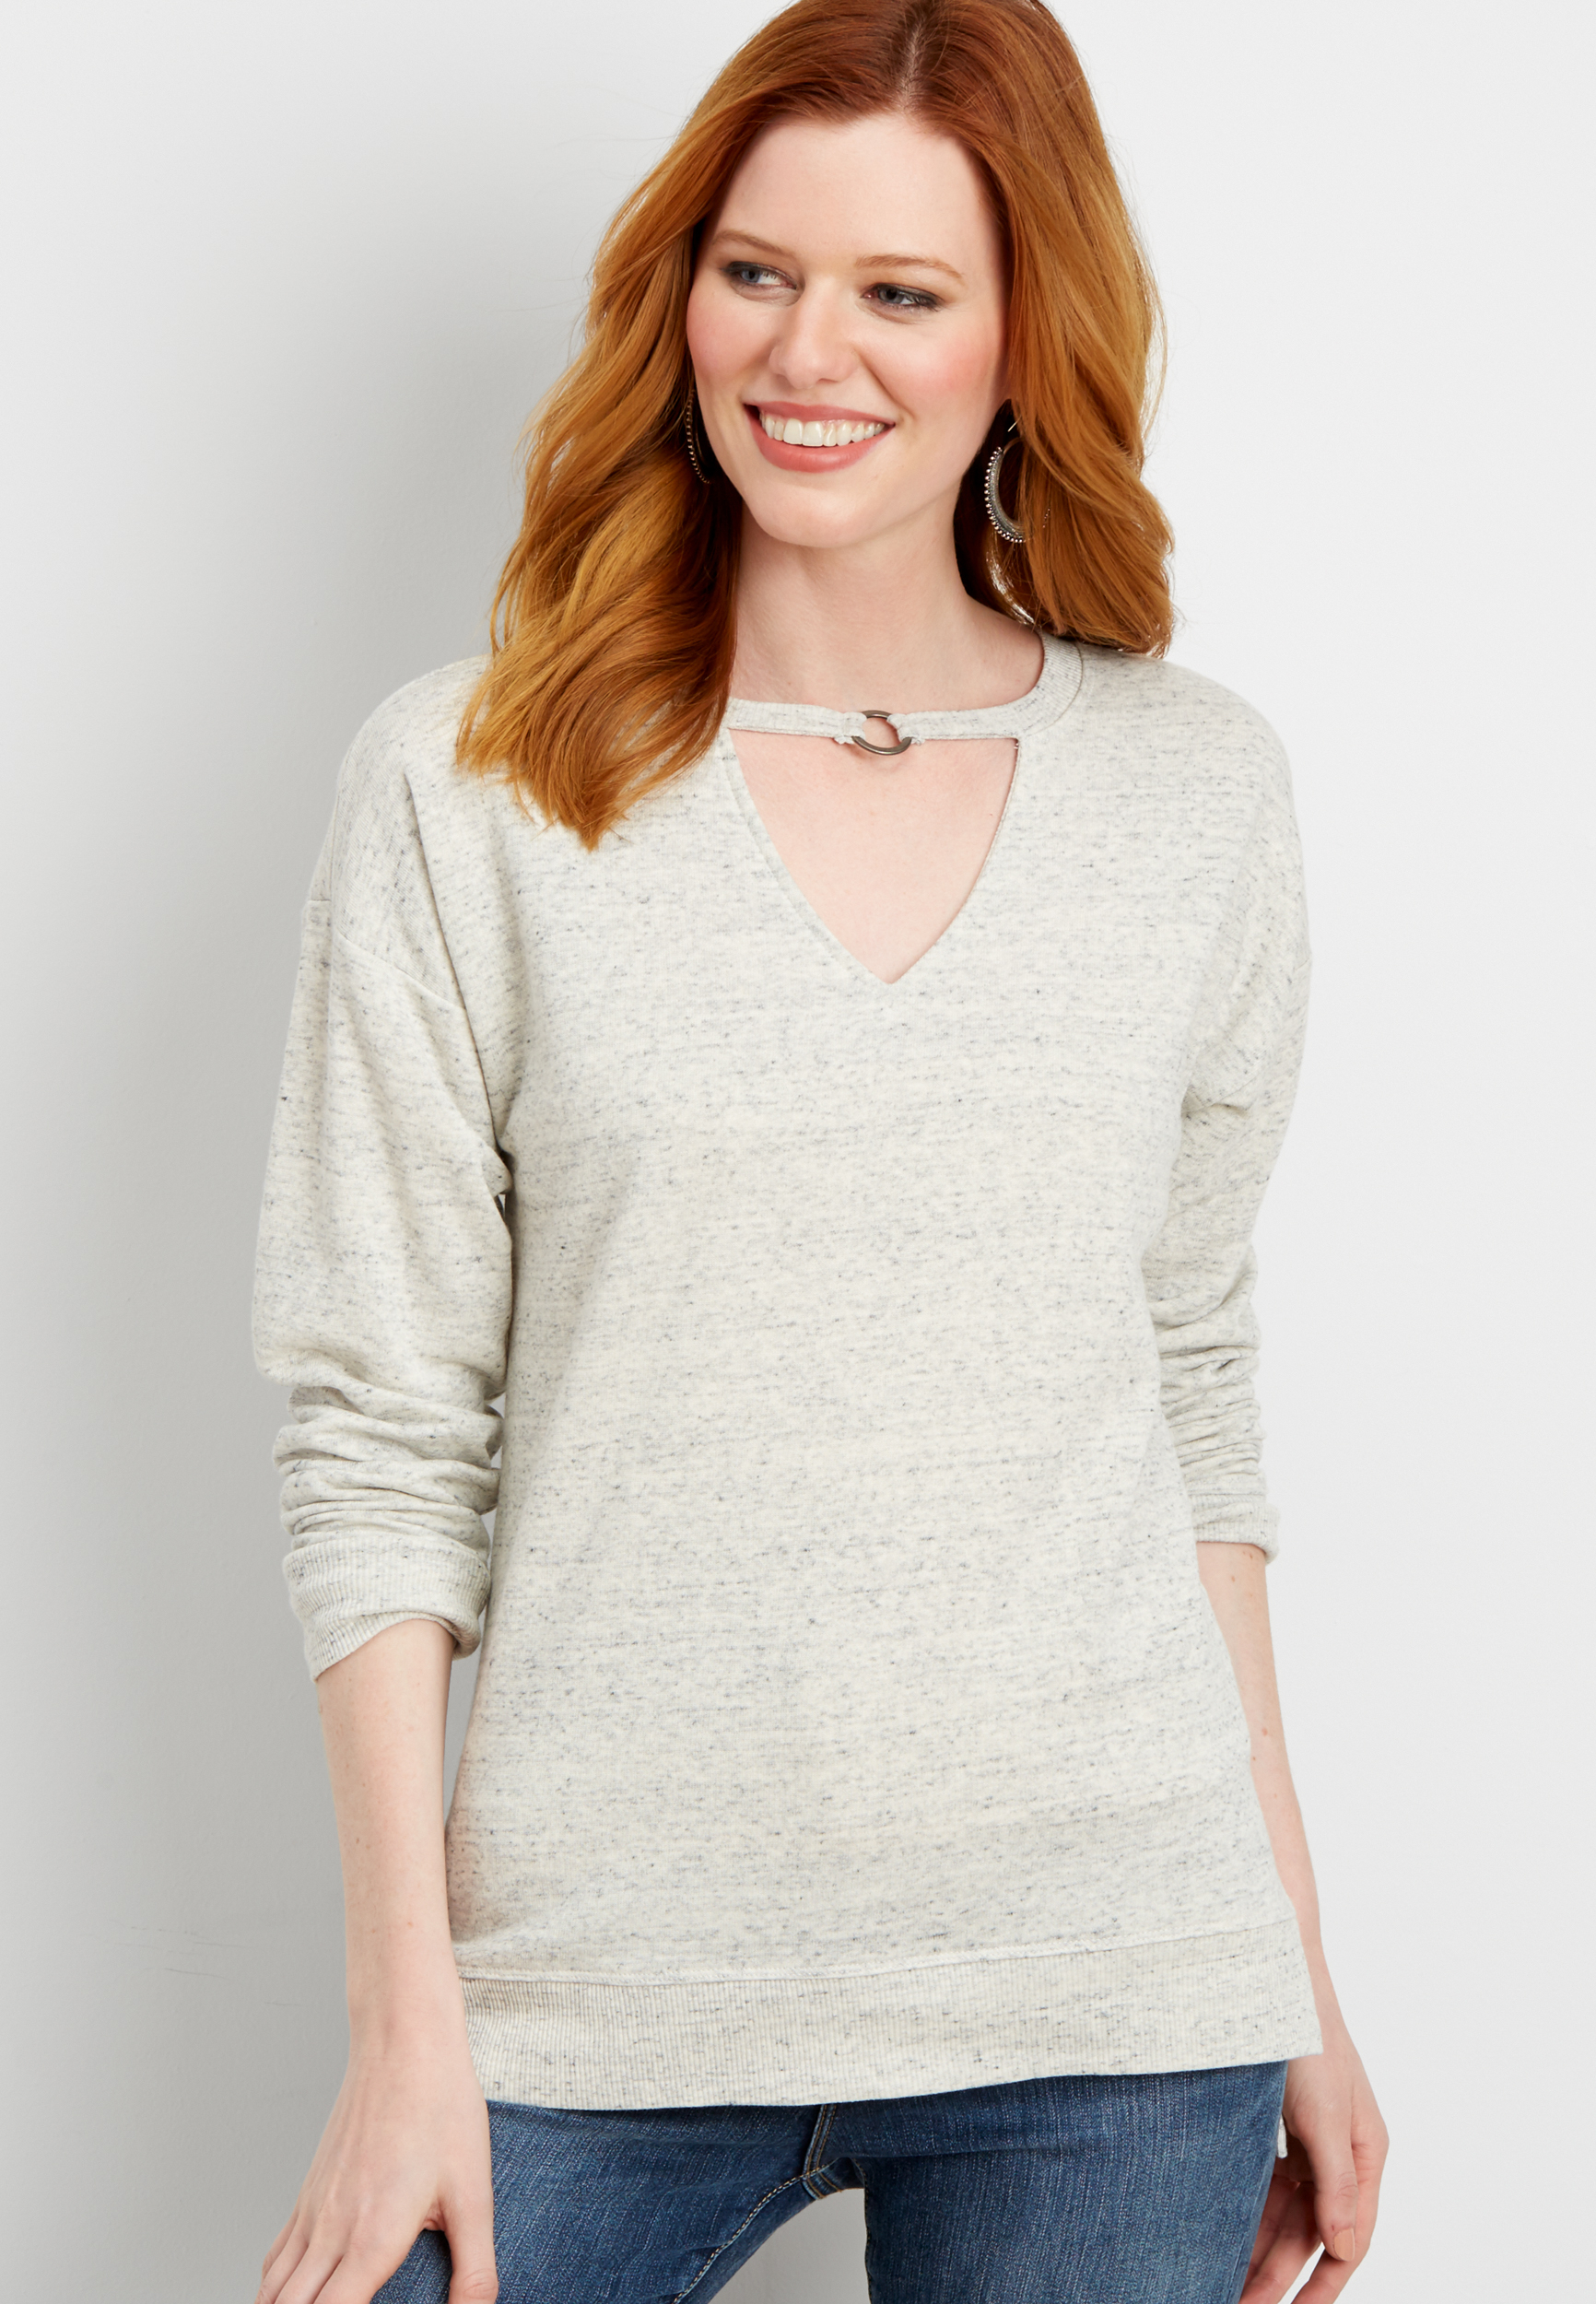 heathered sweatshirt with cut out neckline | maurices